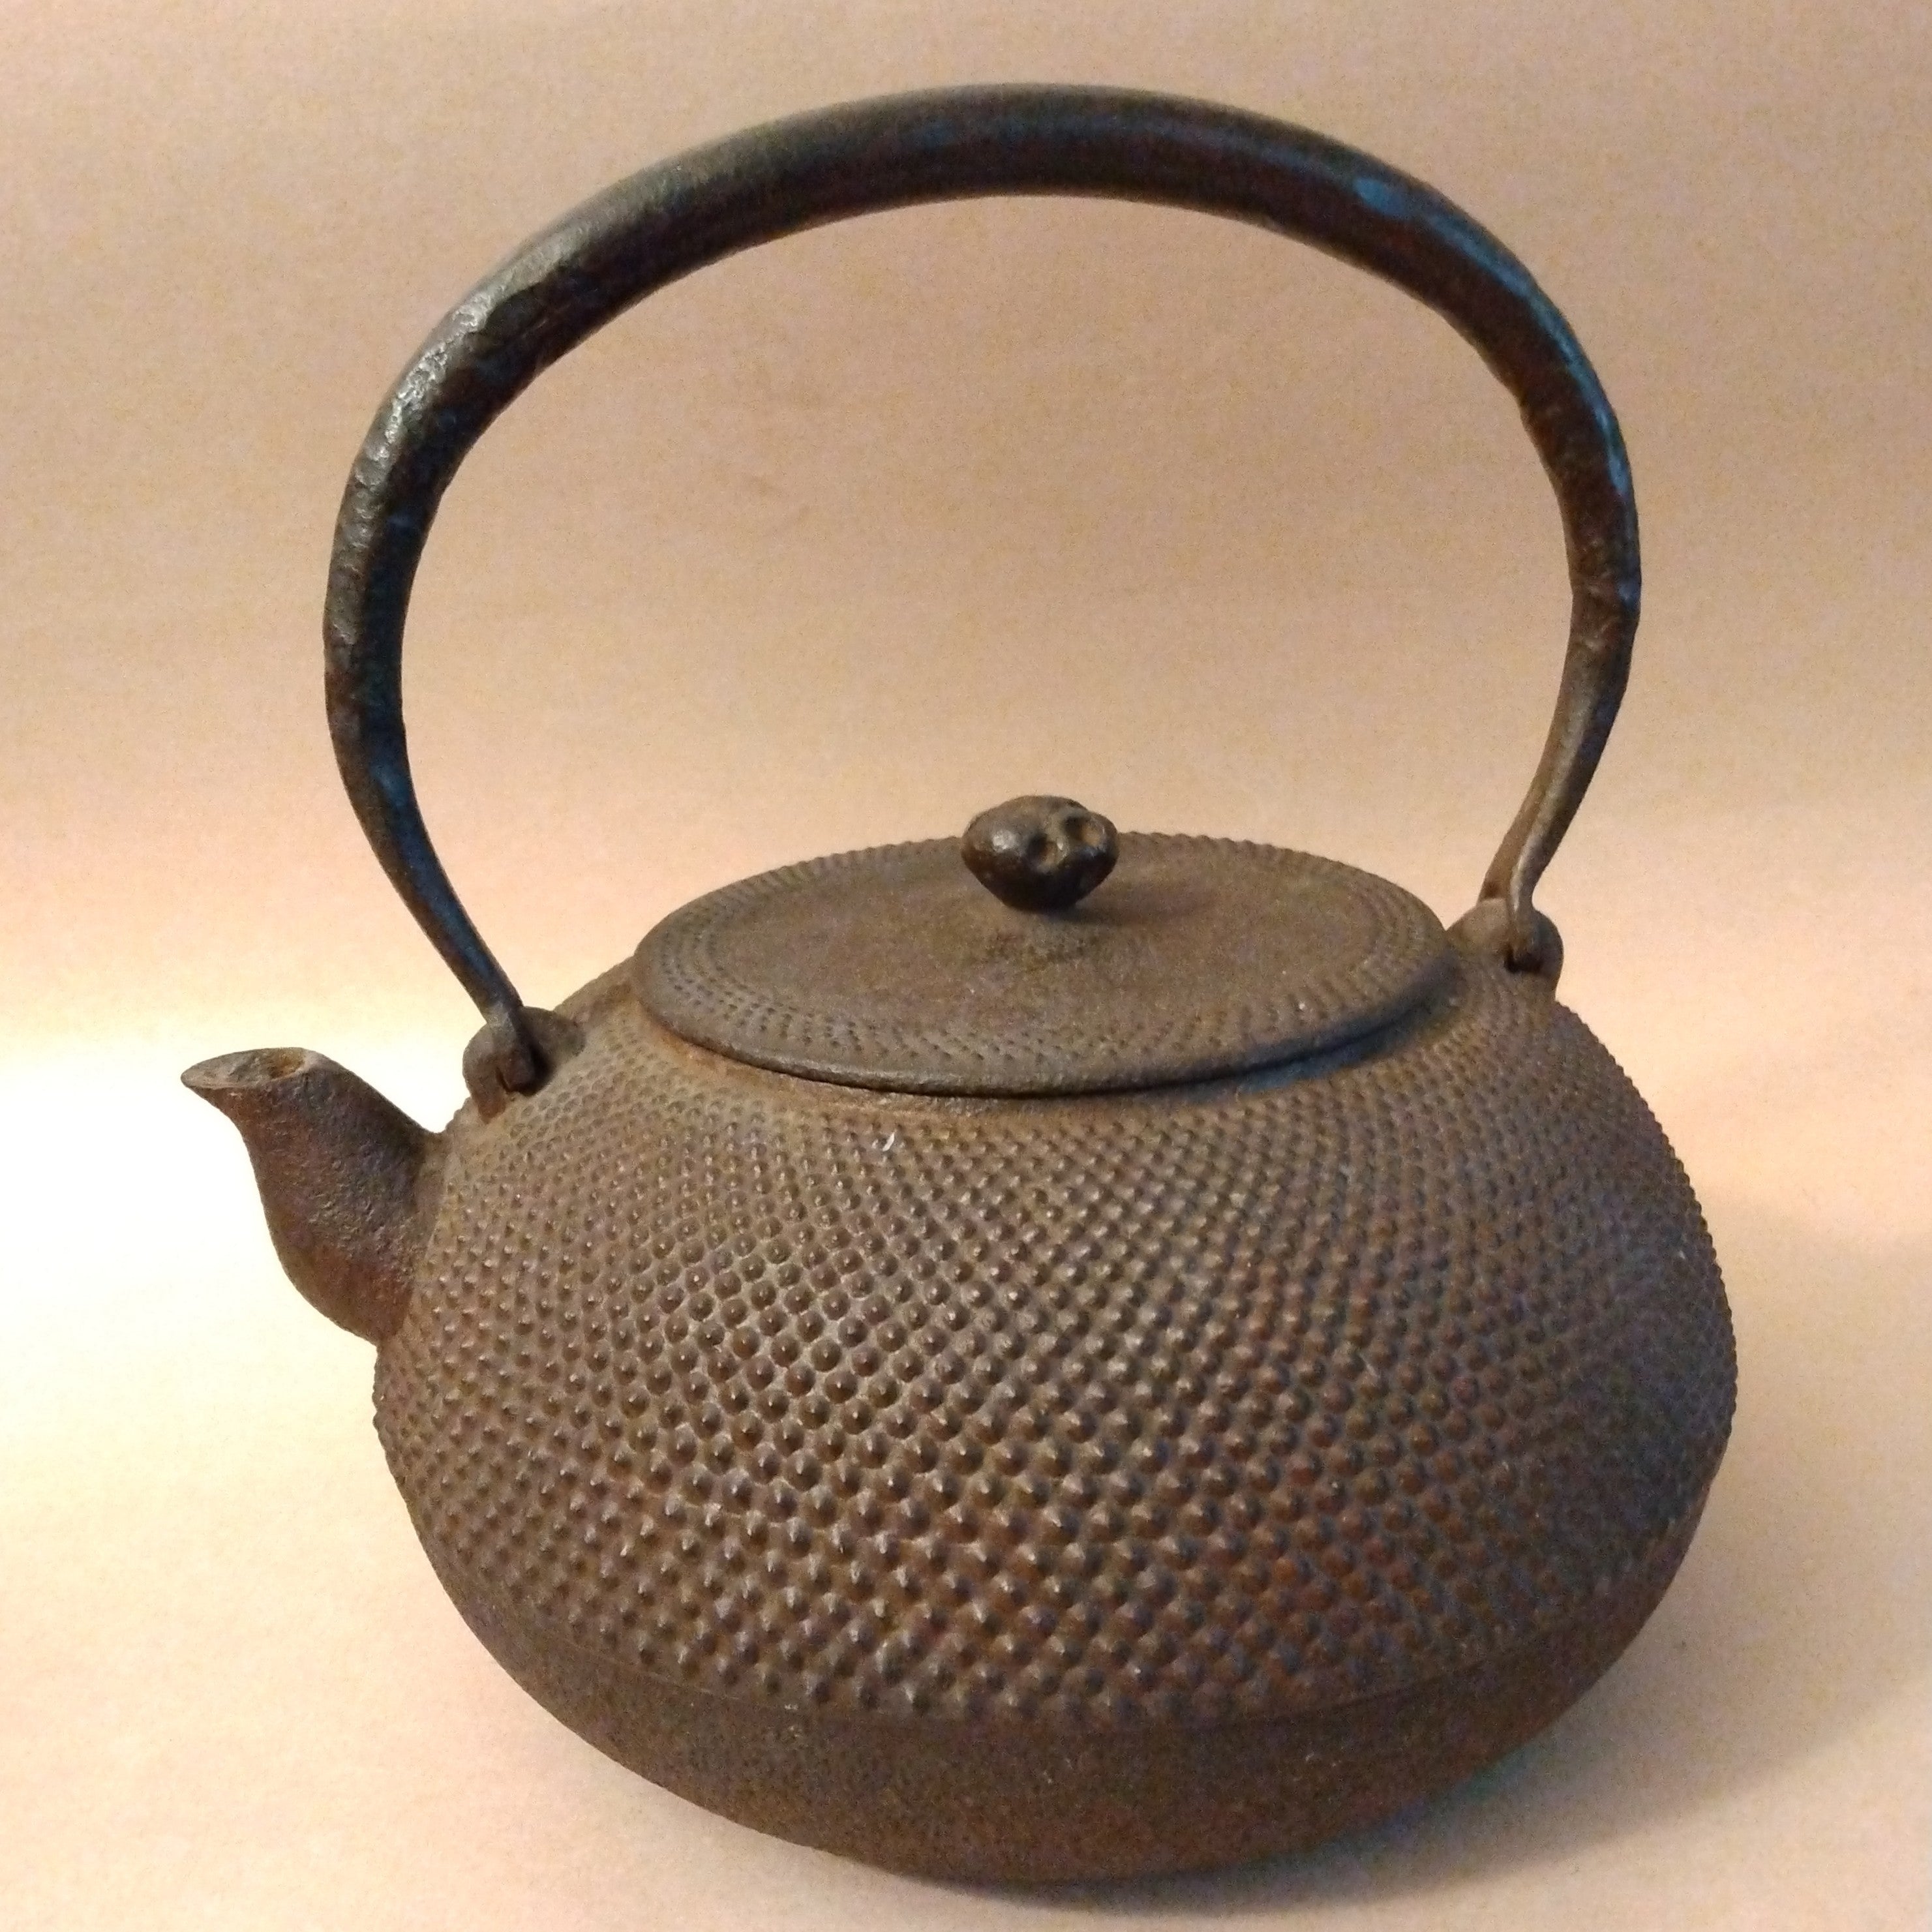 Nambu Testsubin, Cast Iron Kettle from Iwate Prefecture; Thiel Collection